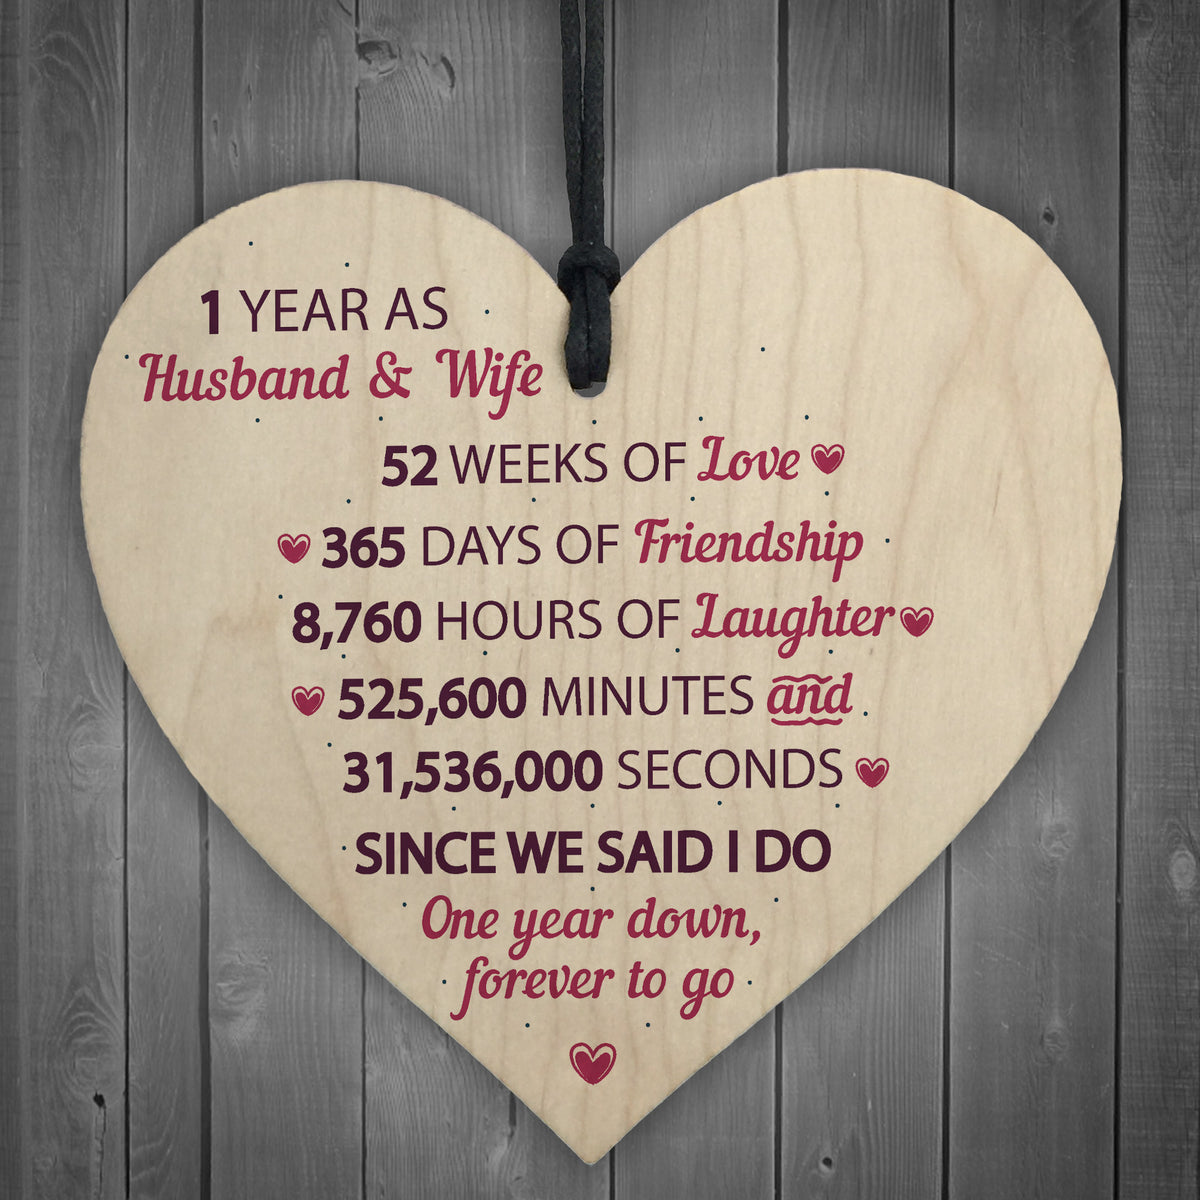 Details about   NH1 PERSONALISED WOODEN ENTWINED HEARTwedding anniversary gift keepsake gift, 